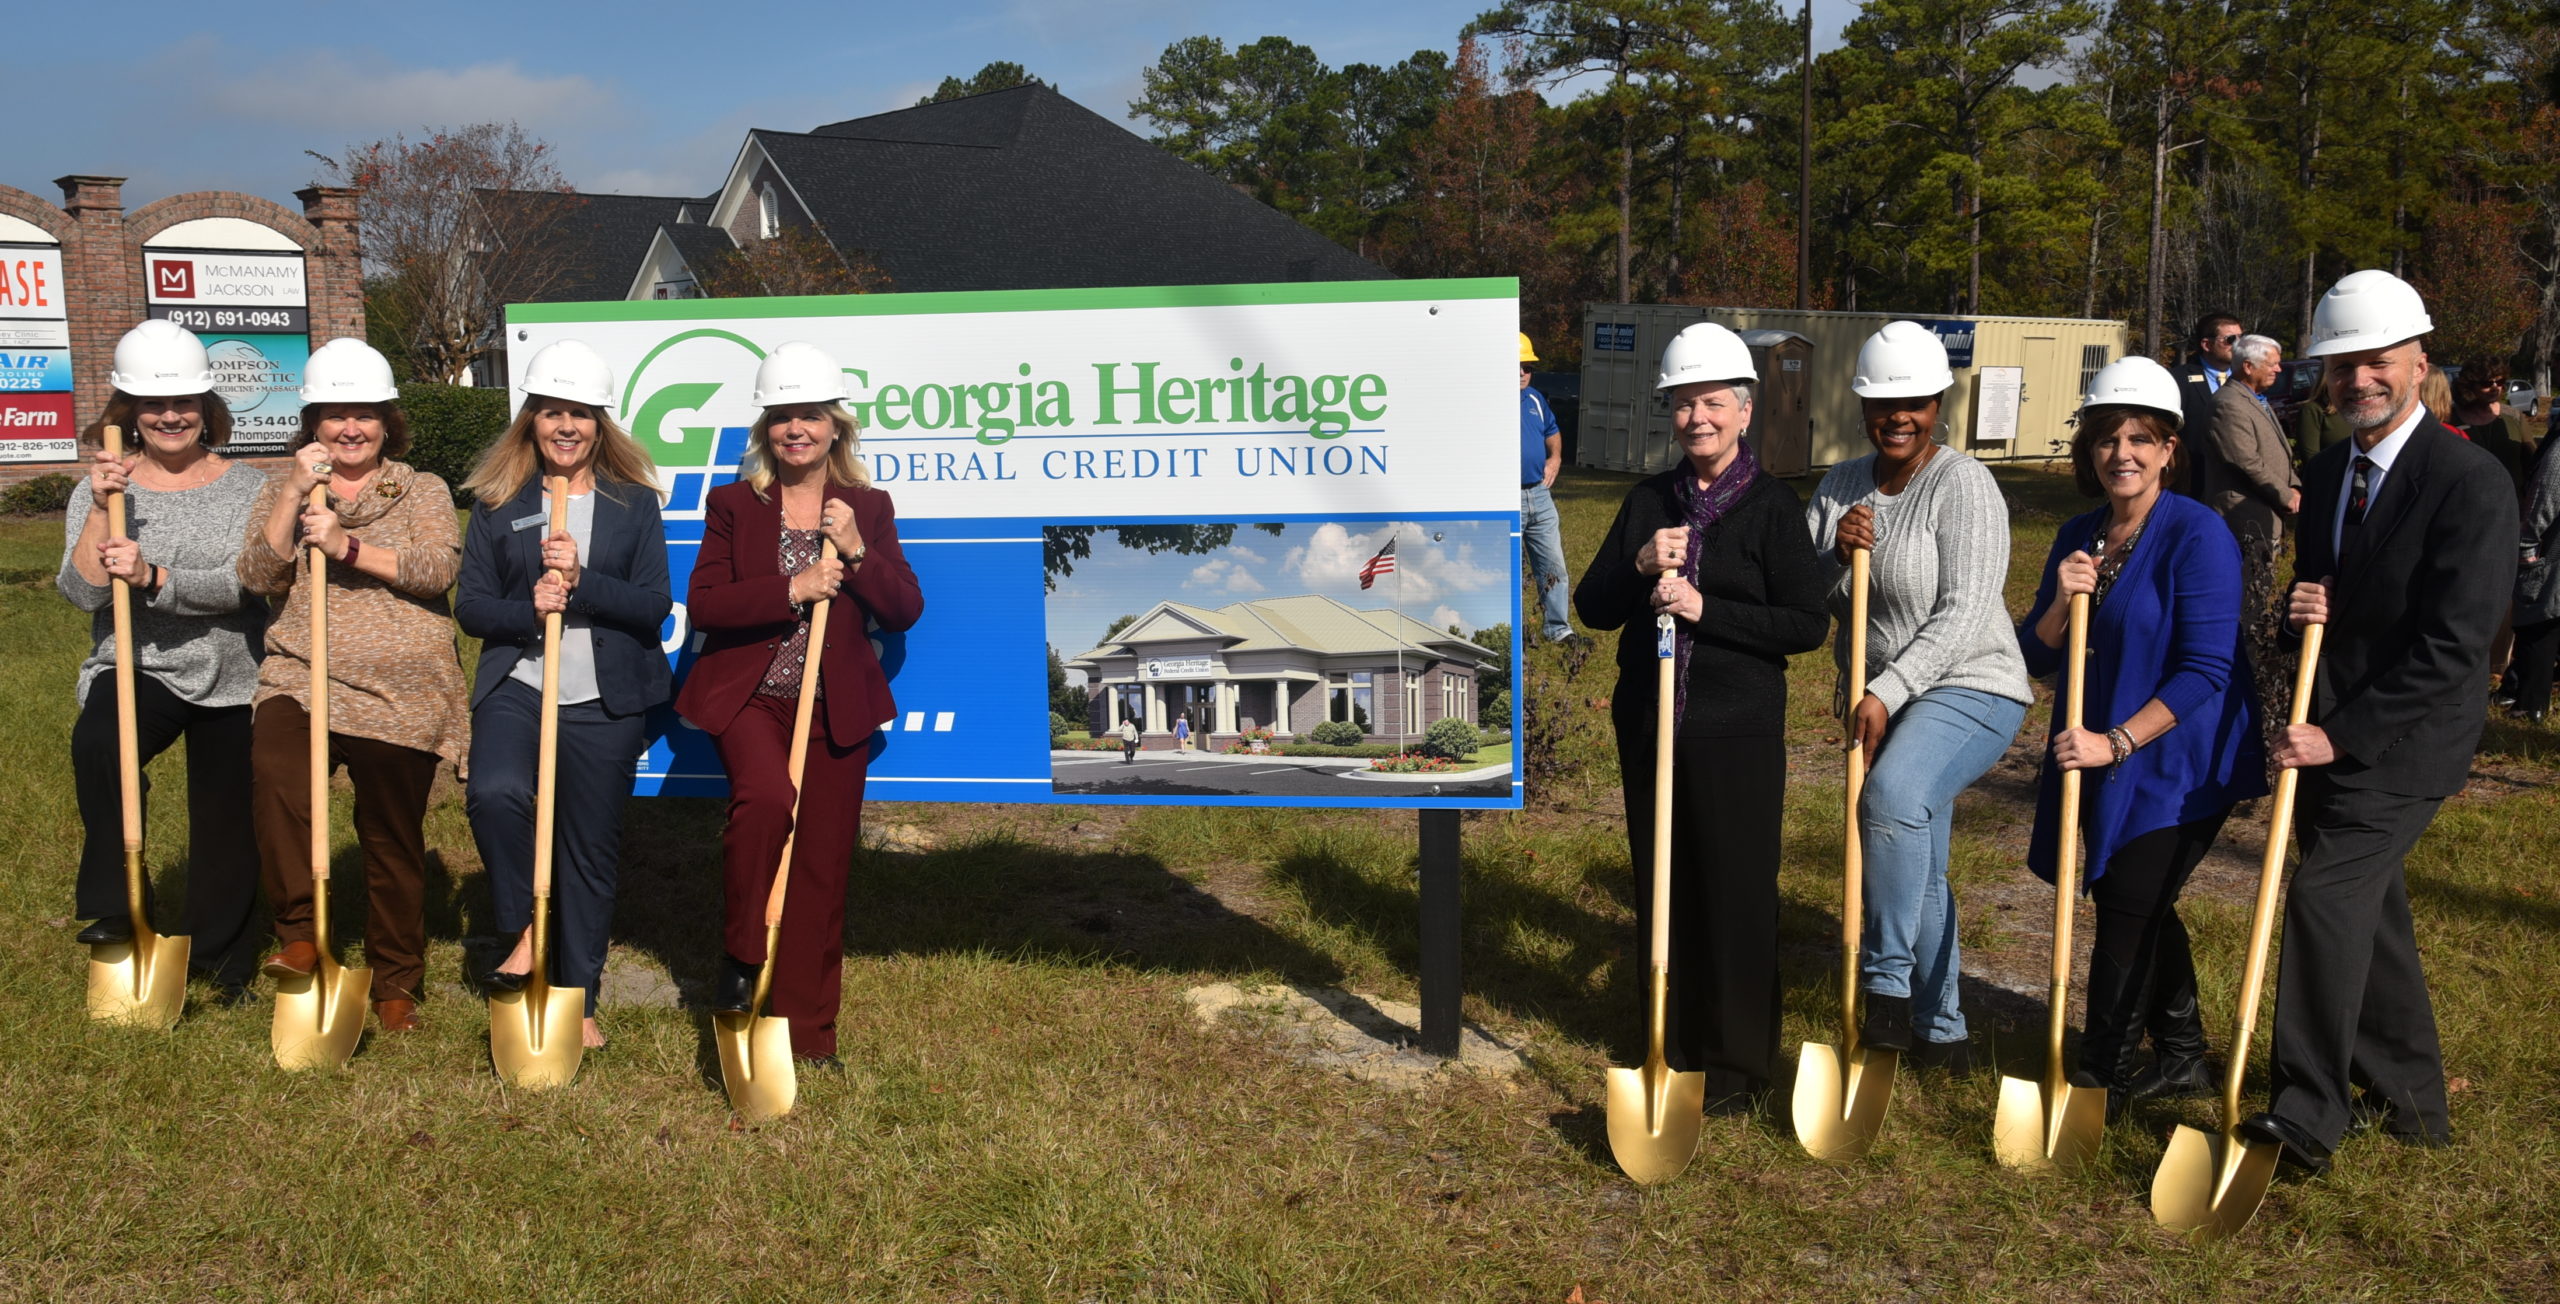 Susan Helmey (left), Donna Trapani, Billie Dees, Toni Brantley, Brenda Elmgren, Karen Bogans, Becky Orsi and Dale Taratuta participate in the groundbreaking ceremony for the opening of the Georgia Heritage Federal Credit Union branch in Rincon, Georgia.